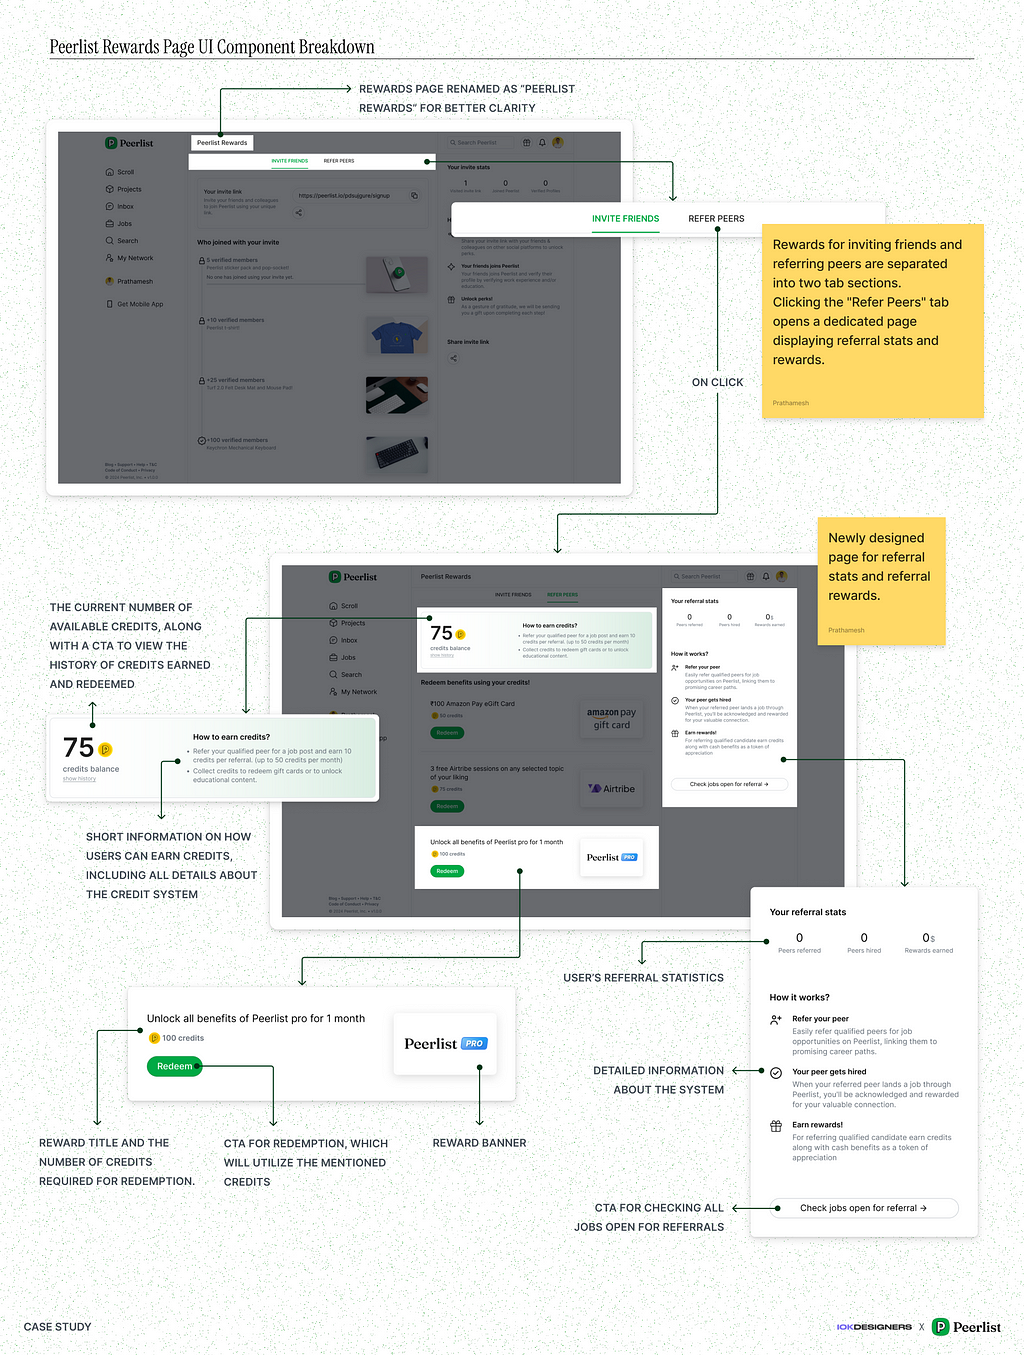 A quick GIF to understand the userflow from the referrer’s POV.